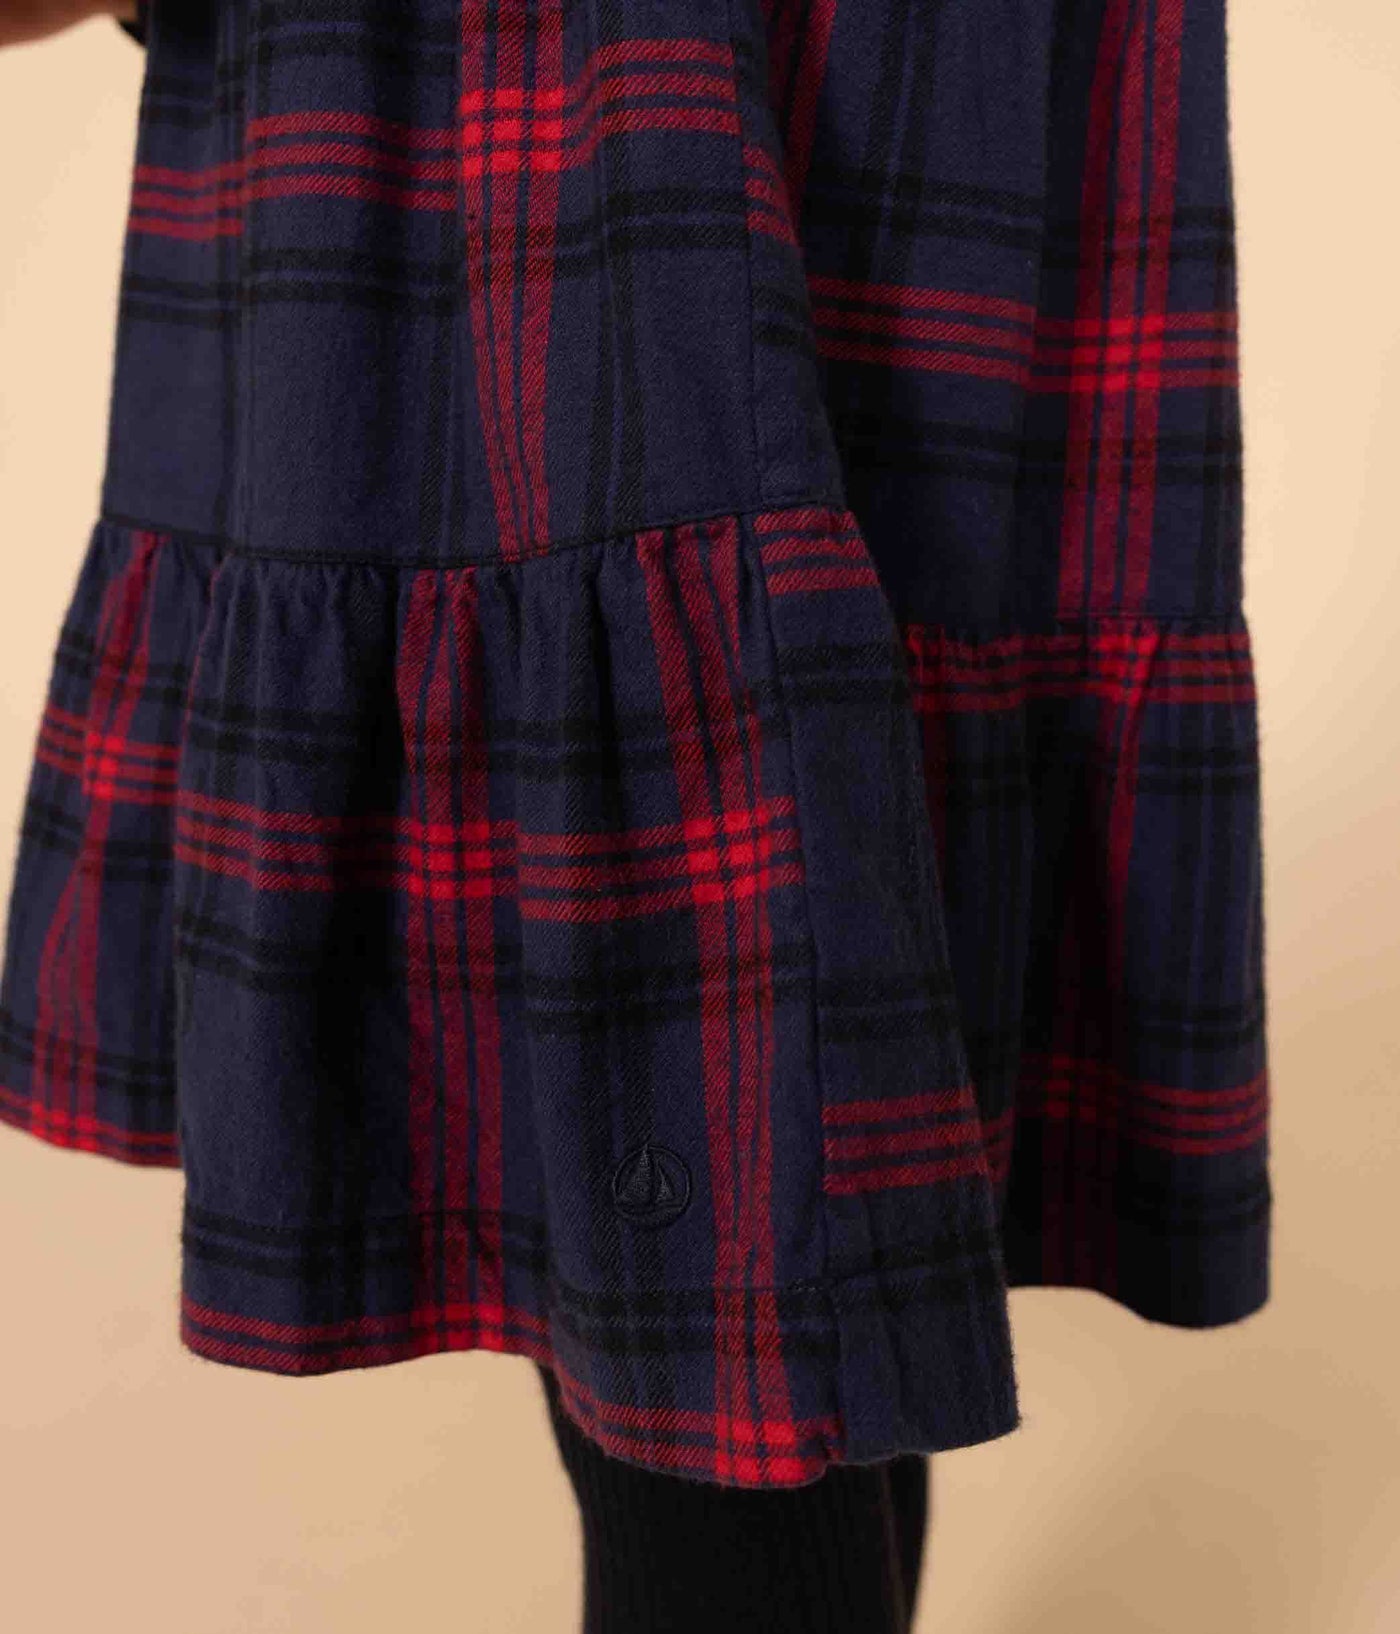 GIRLS' LONG-SLEEVED CHECKED DRESS IN CHECKED COTTON FLANNEL